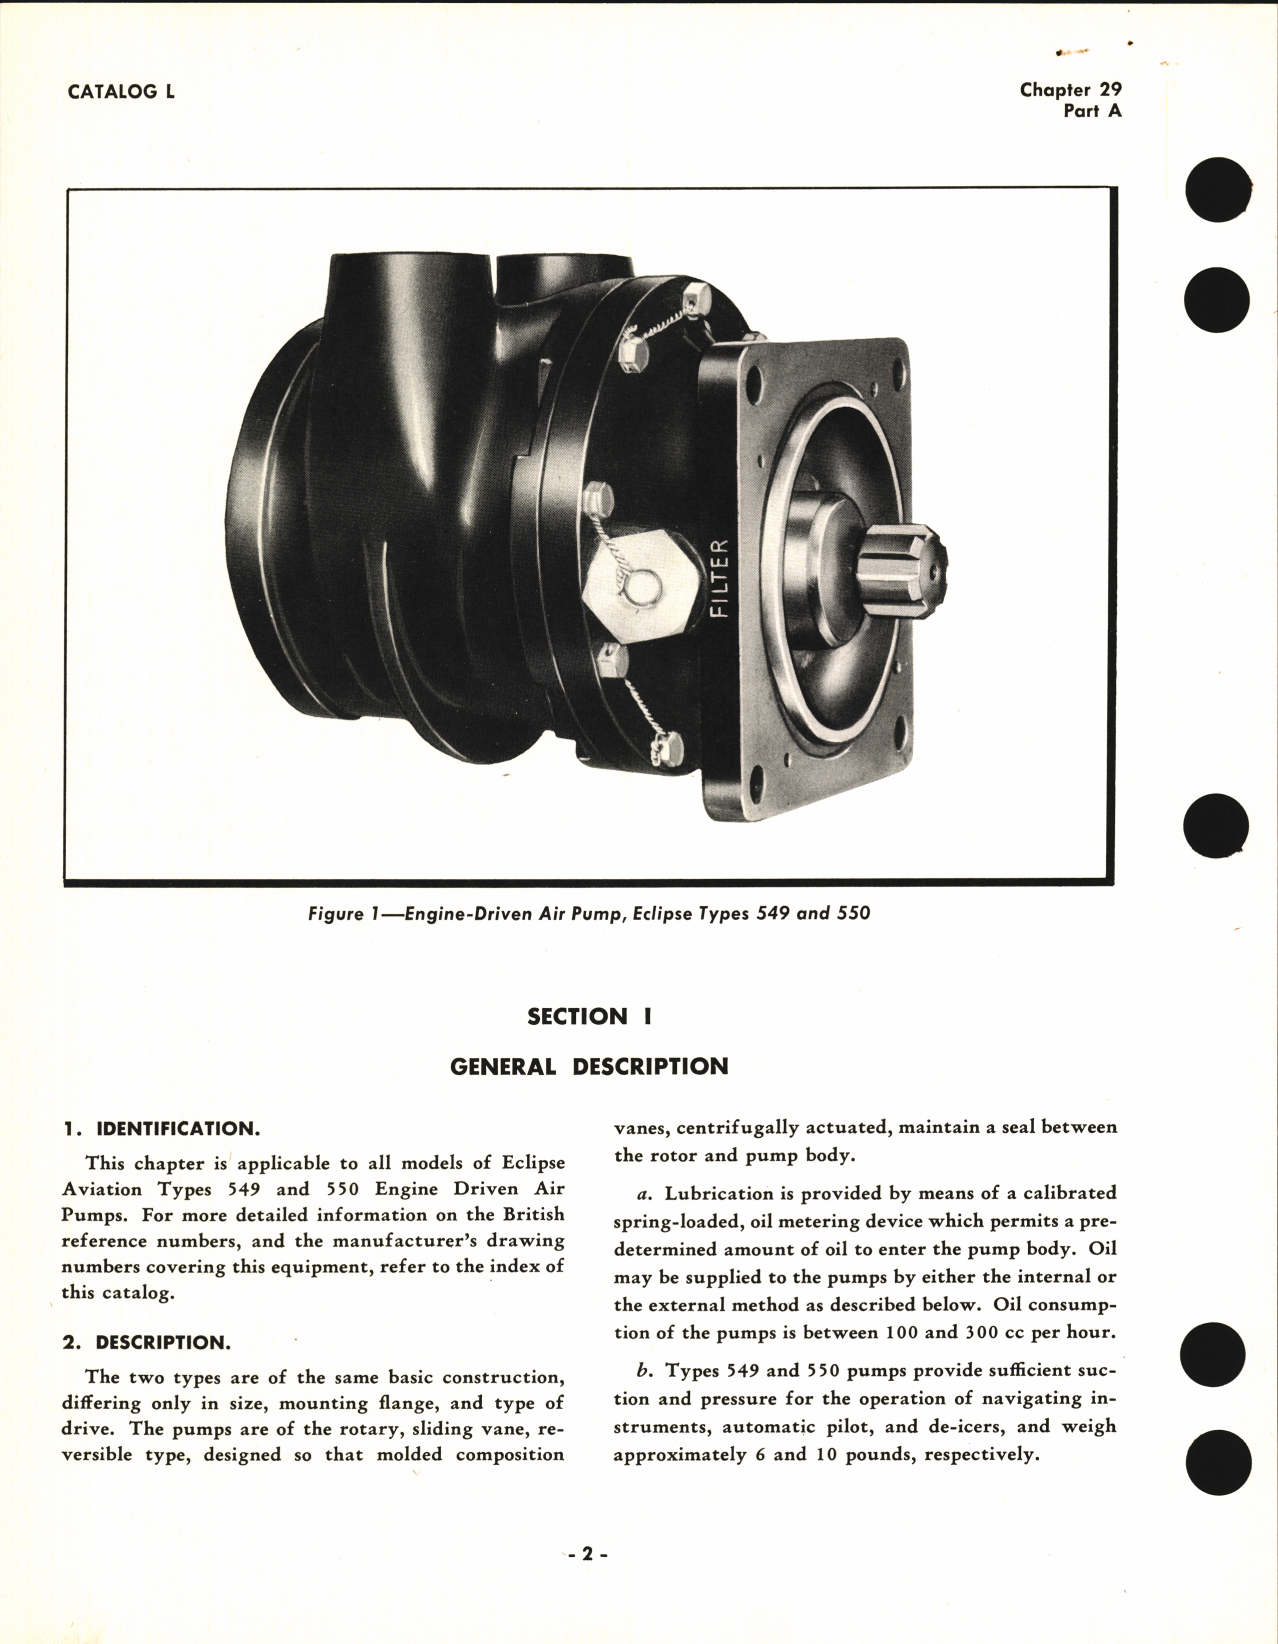 Sample page 2 from AirCorps Library document: Operating and Service Instructions for Eclipse Aviation Engine-Driven Air Pumps Types 549 and 550